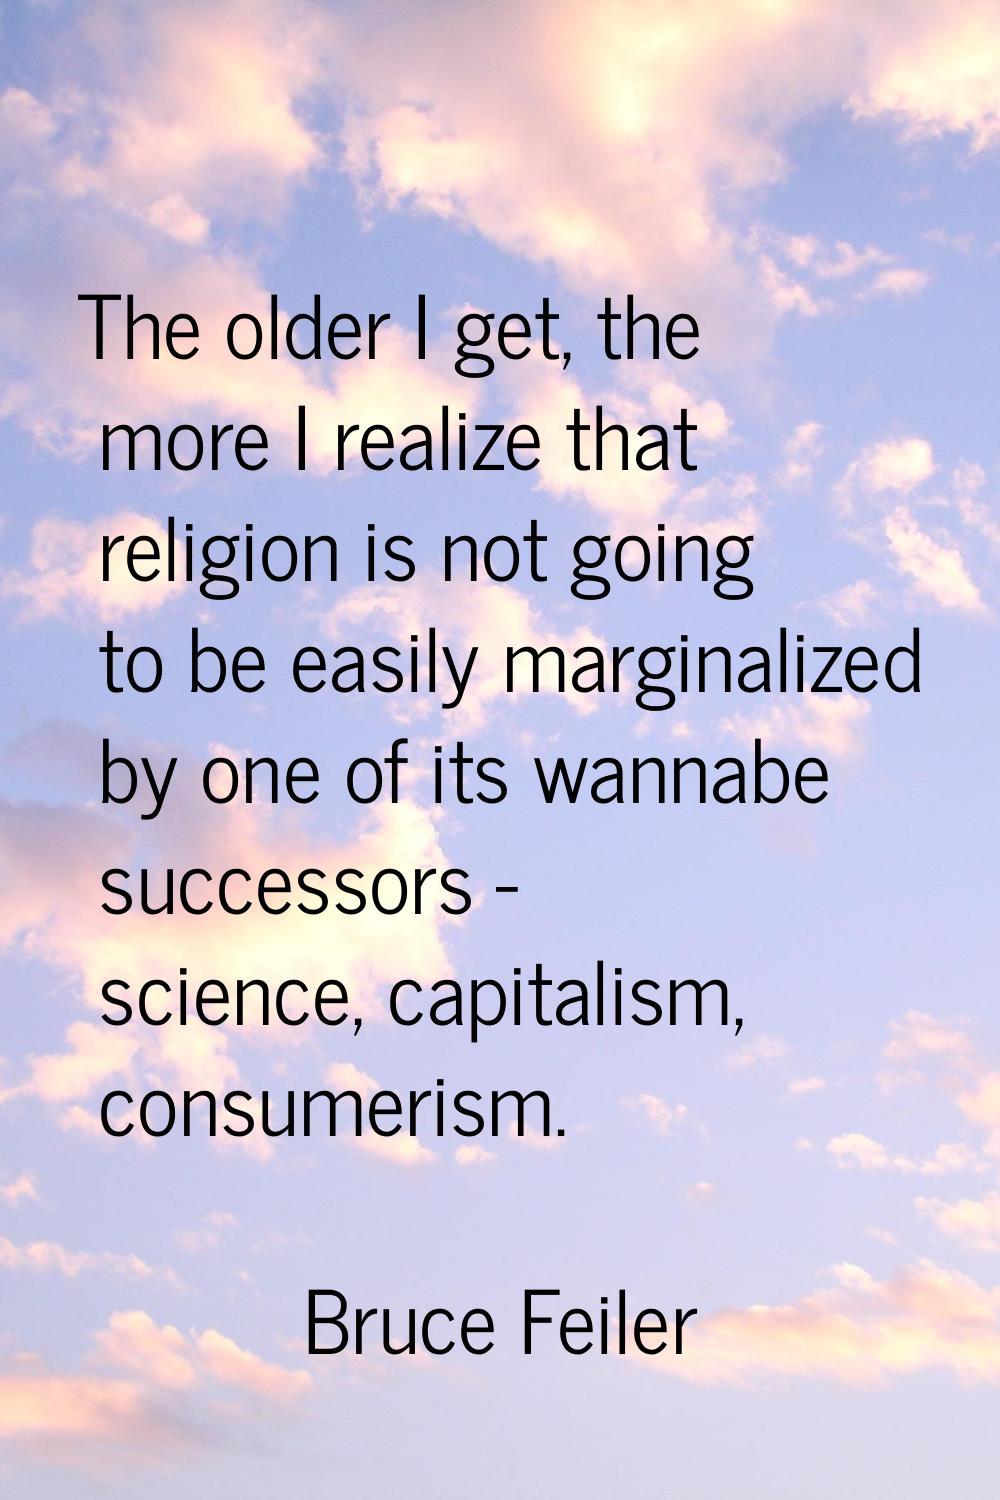 The older I get, the more I realize that religion is not going to be easily marginalized by one of 